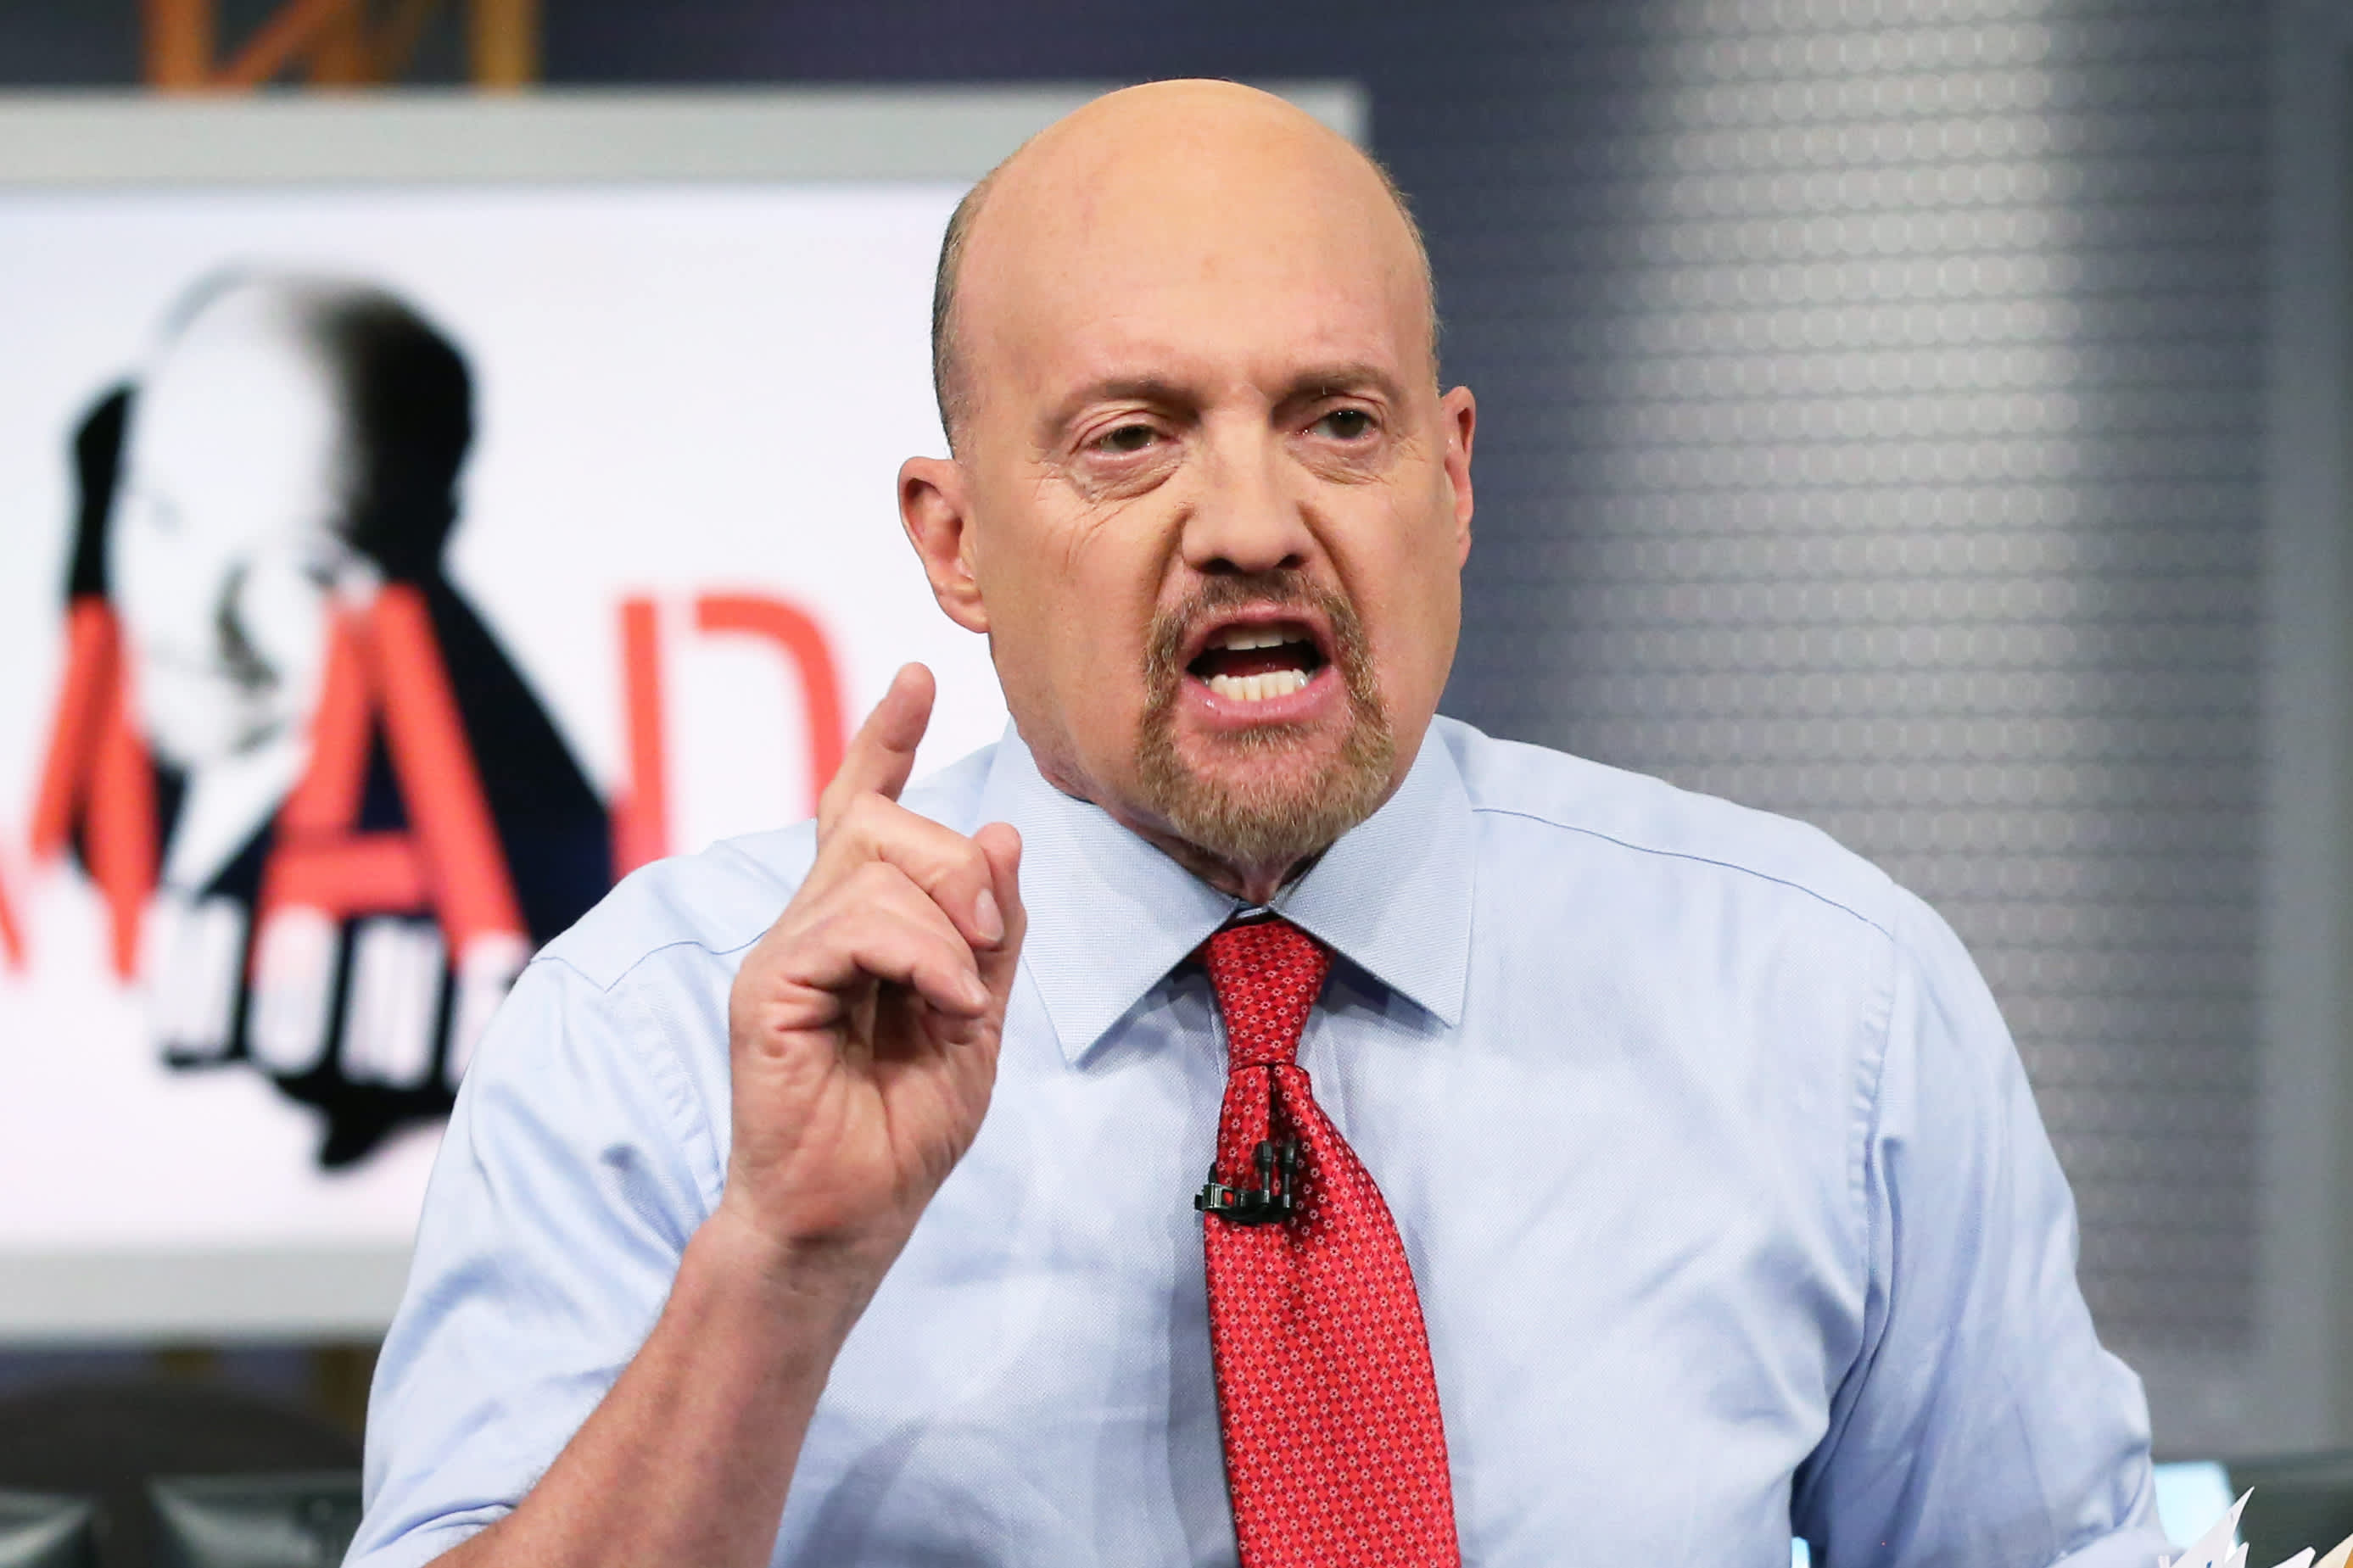 CNBC's Jim Cramer to Move Daily Show to the NYSE Trading Floor | TV Tech